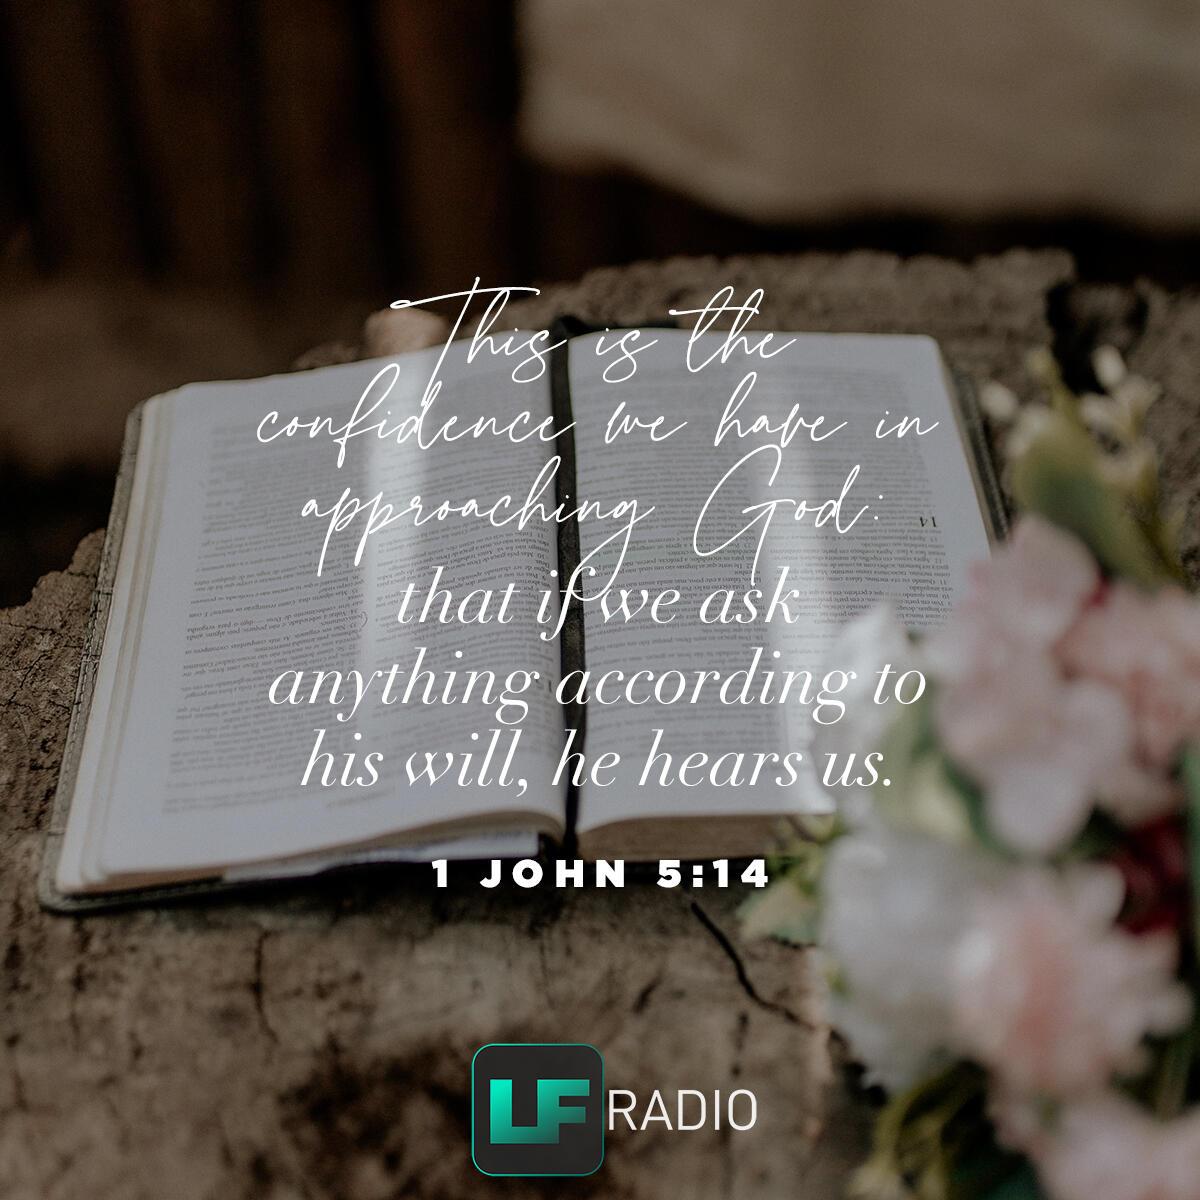 1 John 5:14 - Verse of the Day